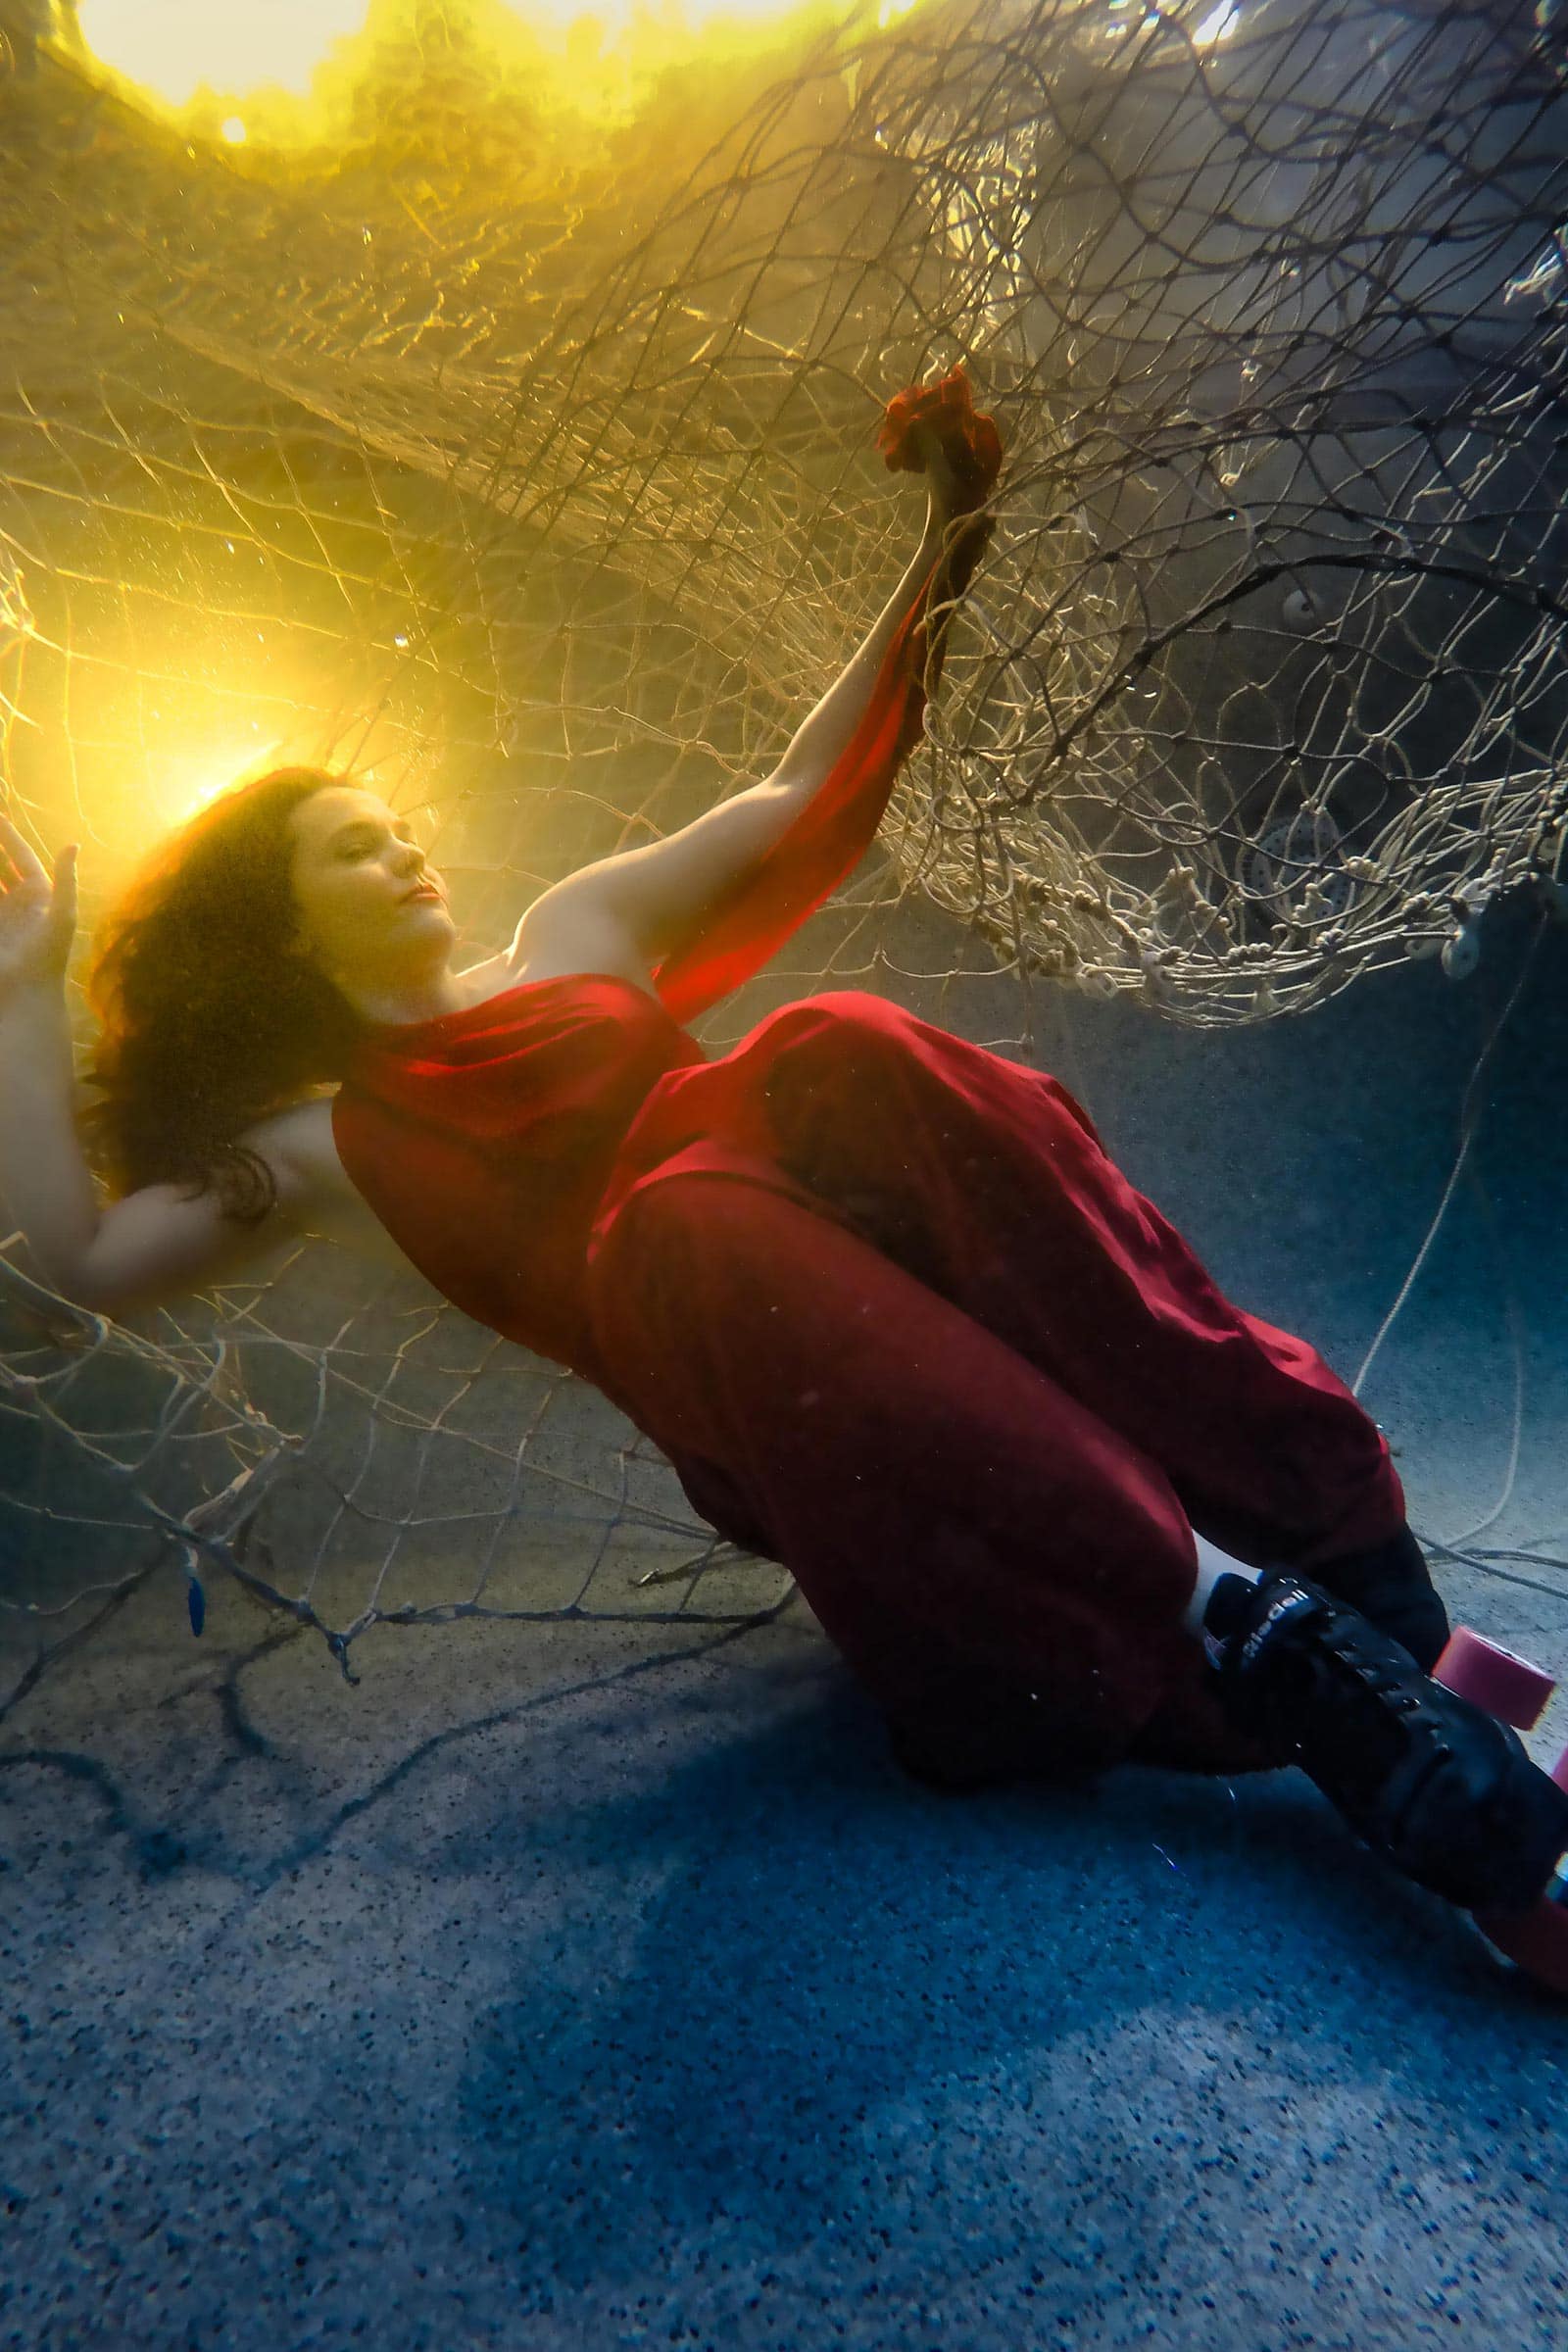 Tangled in the net, a mermaid has been caught